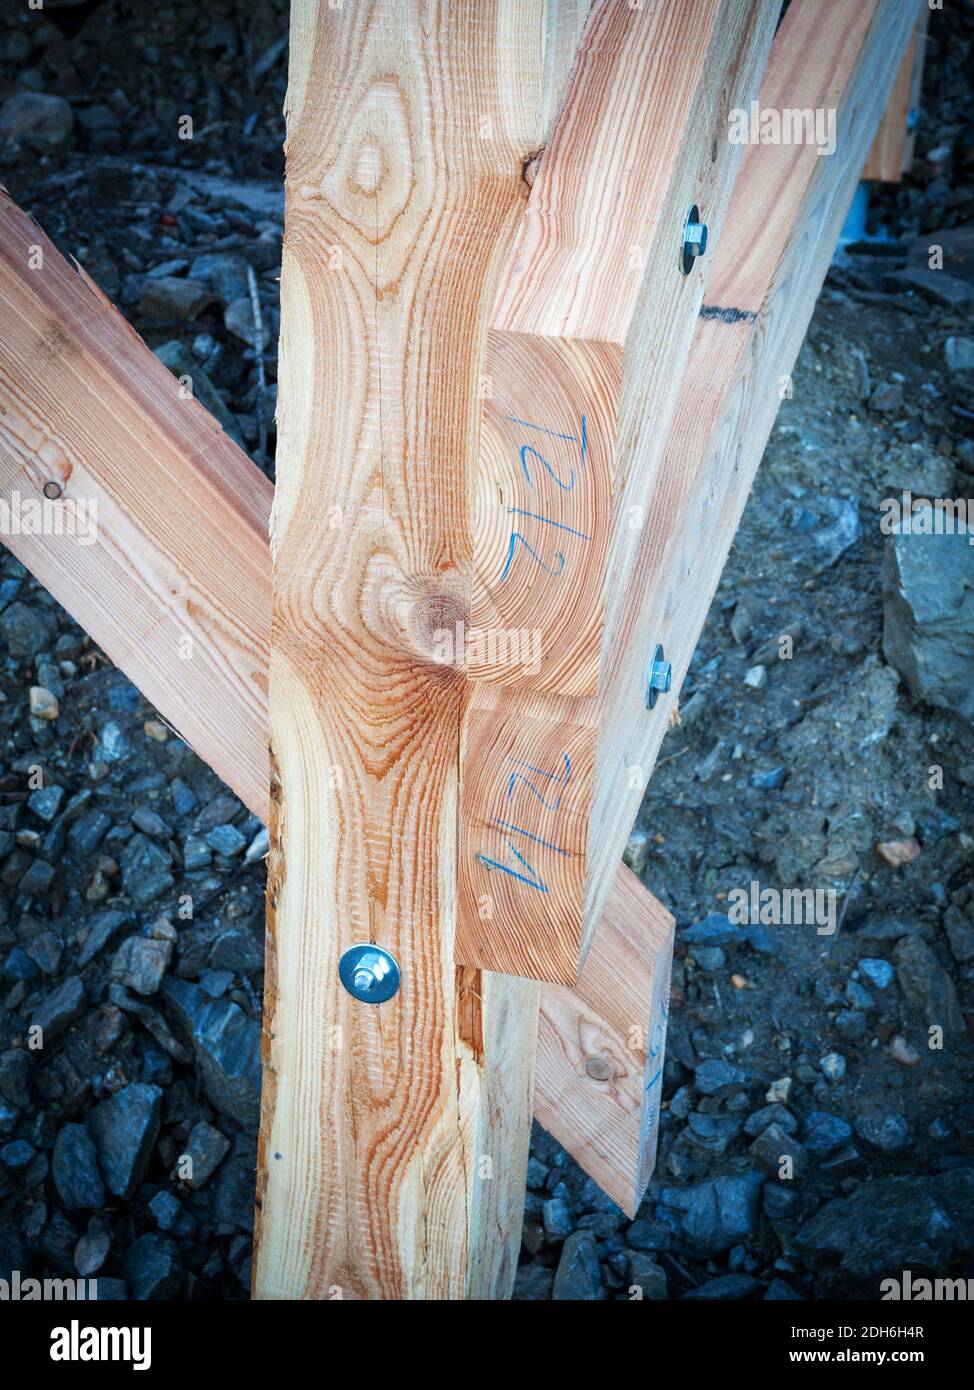 Wooden constuction material Stock Photo